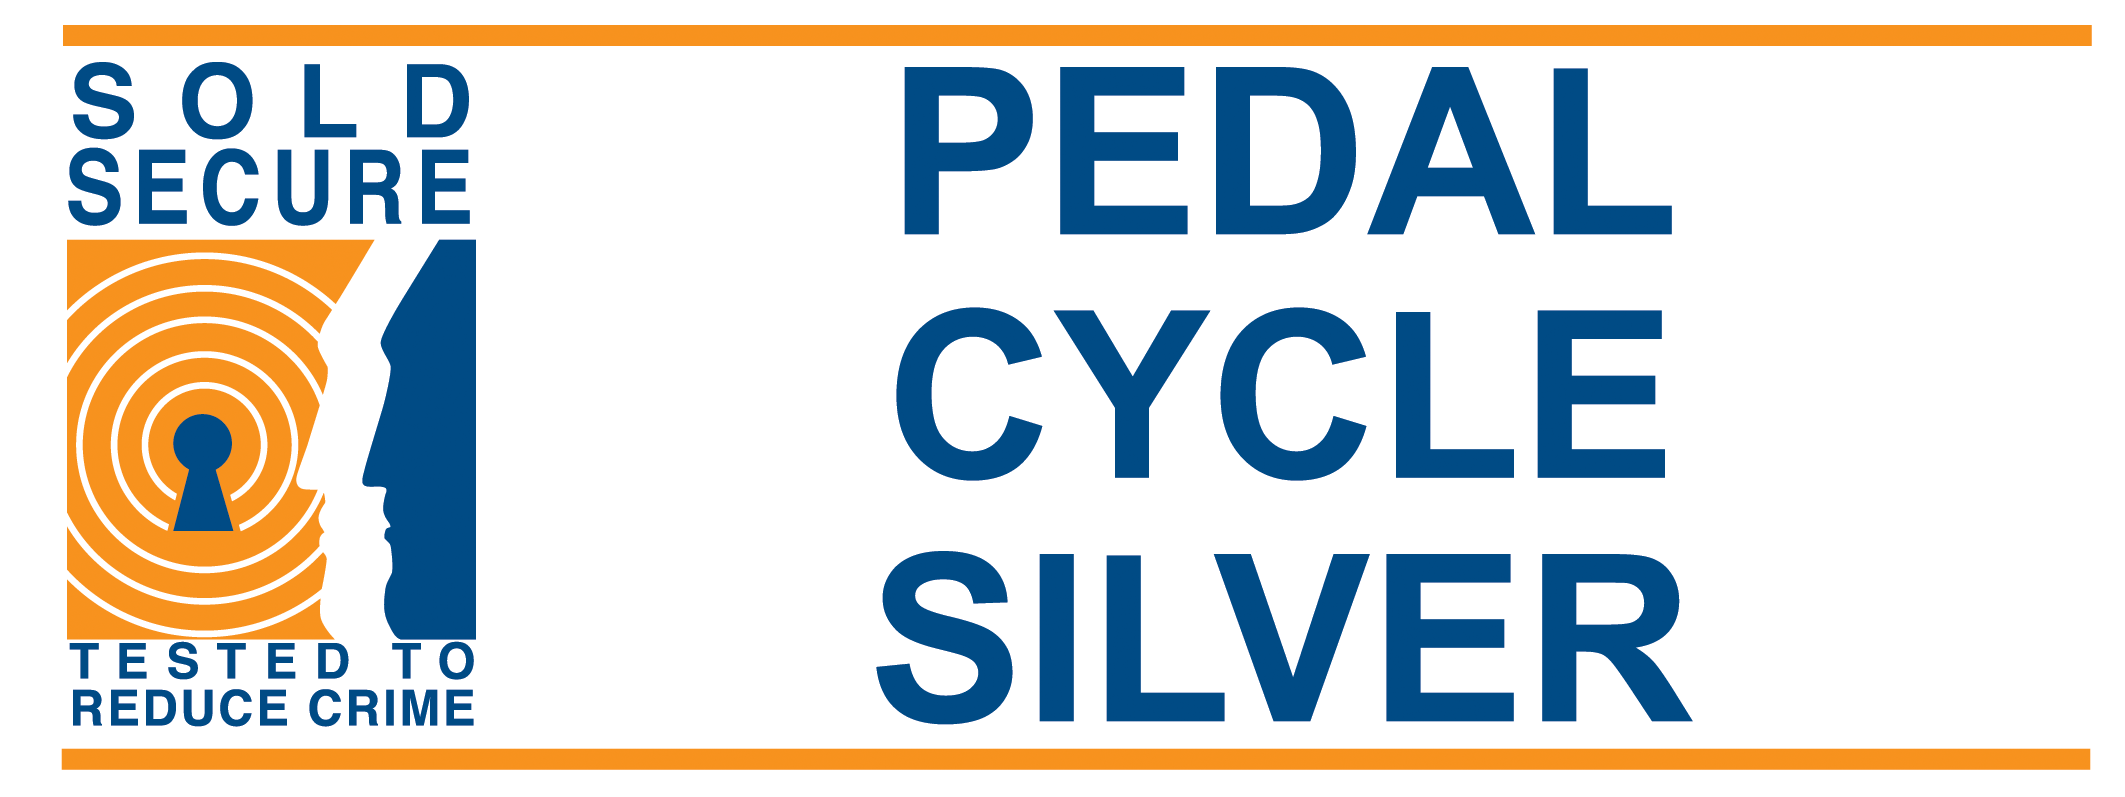 pedal cycle silver zefal